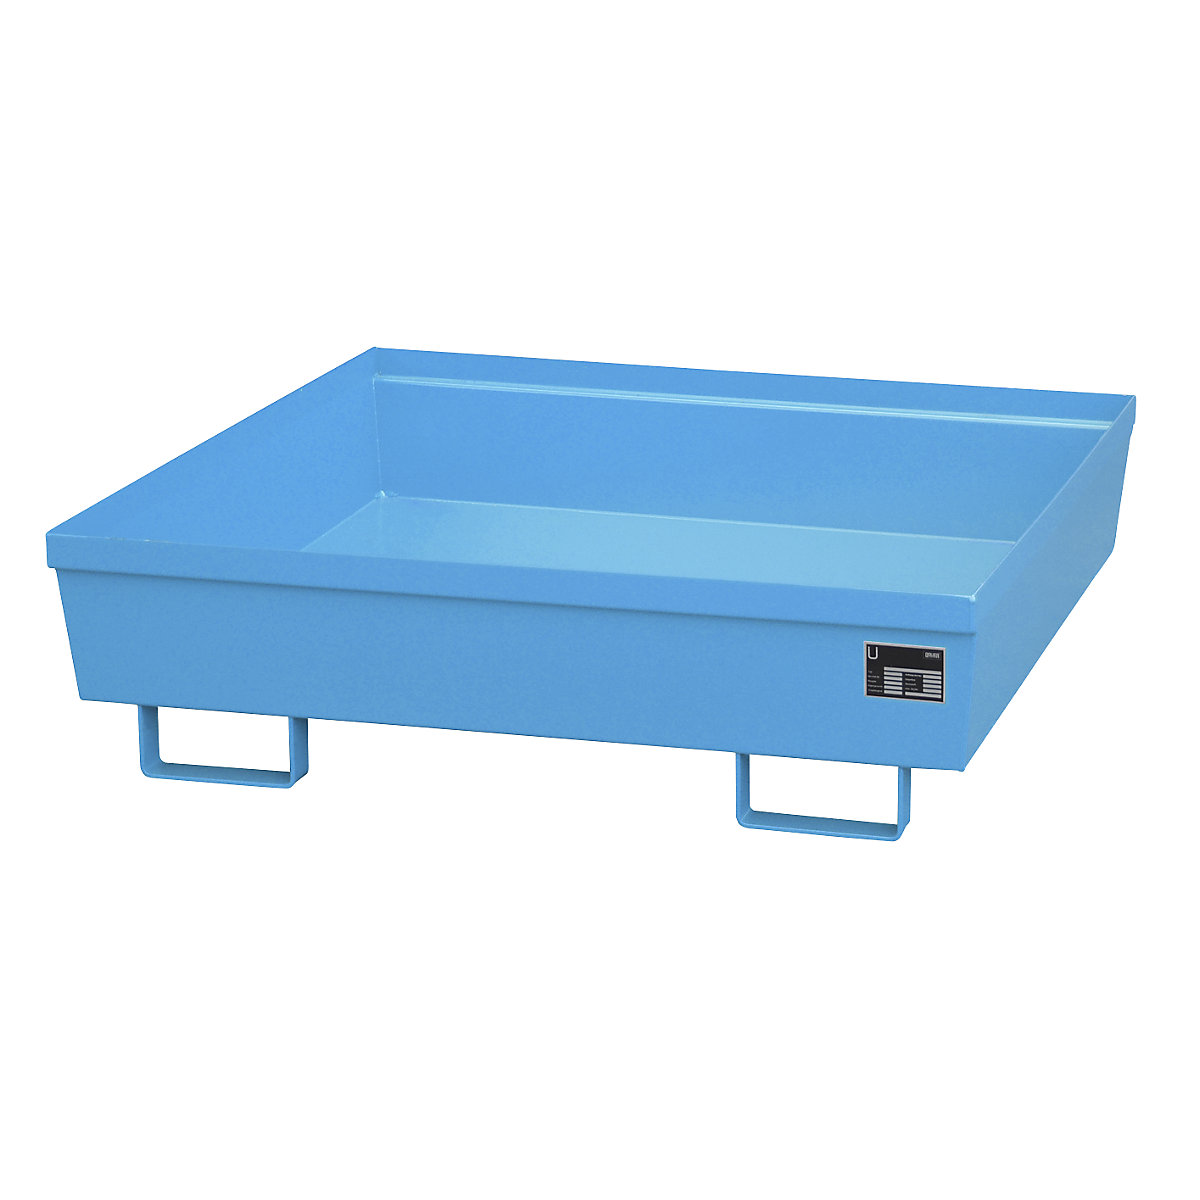 Steel sump tray with edge profiles – eurokraft pro, LxWxH 1200 x 1200 x 335 mm, without grate, blue RAL 5012-6